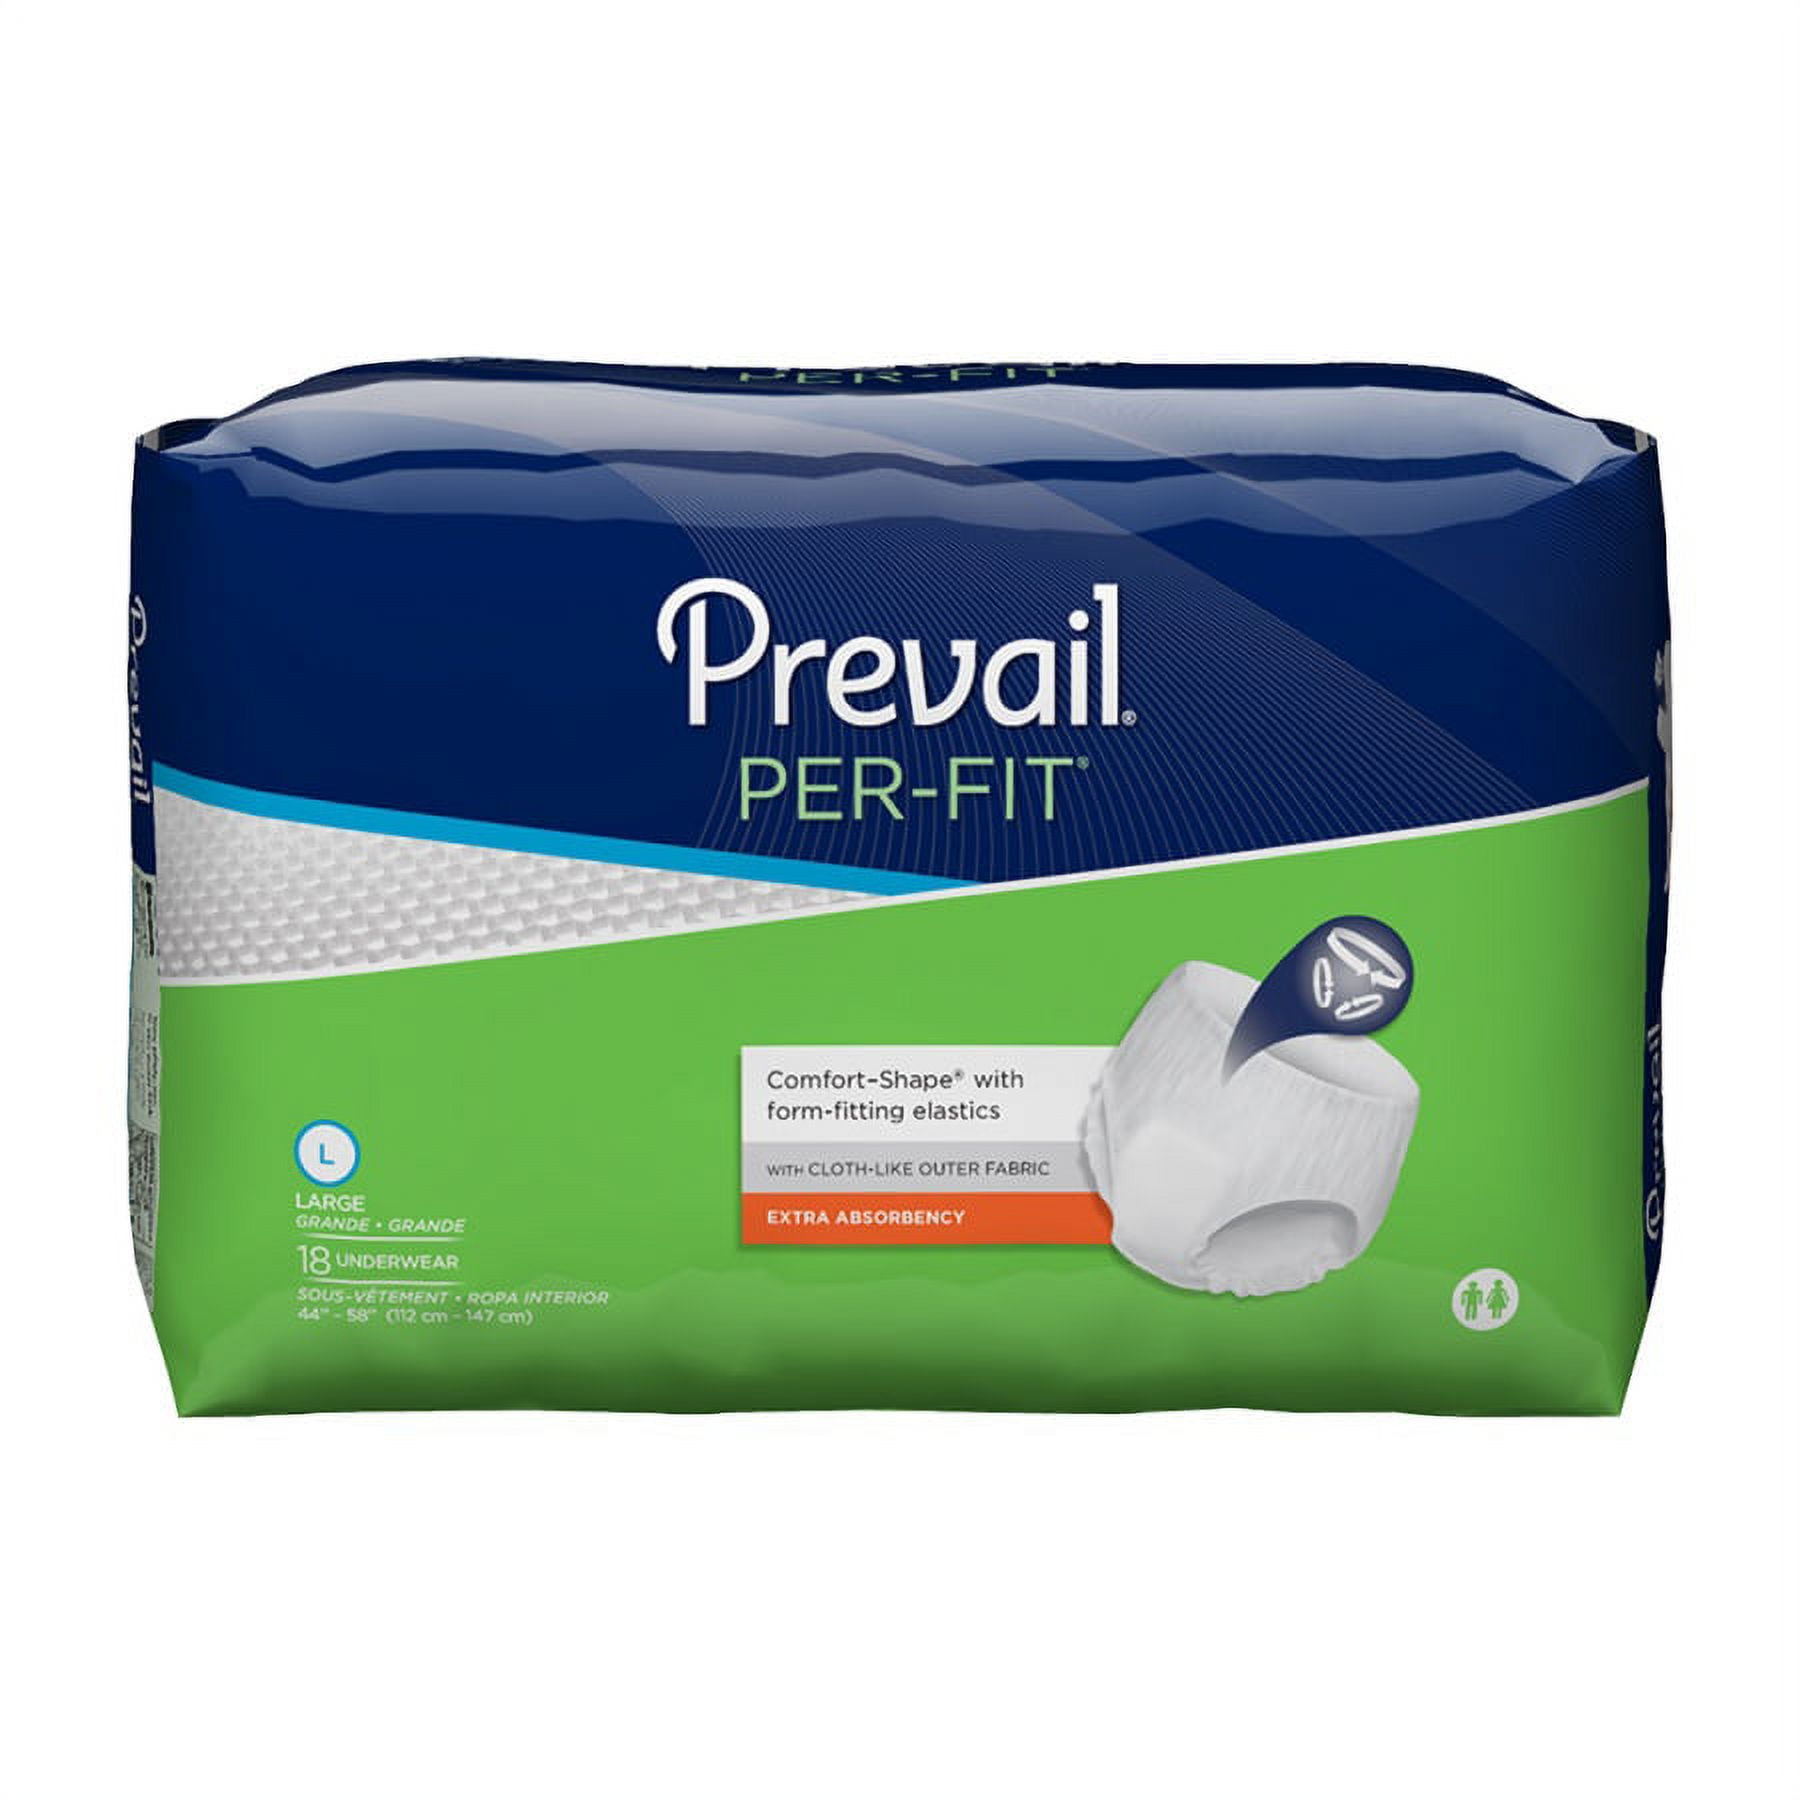 Prevail Per-Fit Underwear, Medium Fits 34 To 46 Inches - 20 Ea, 4 Pack 